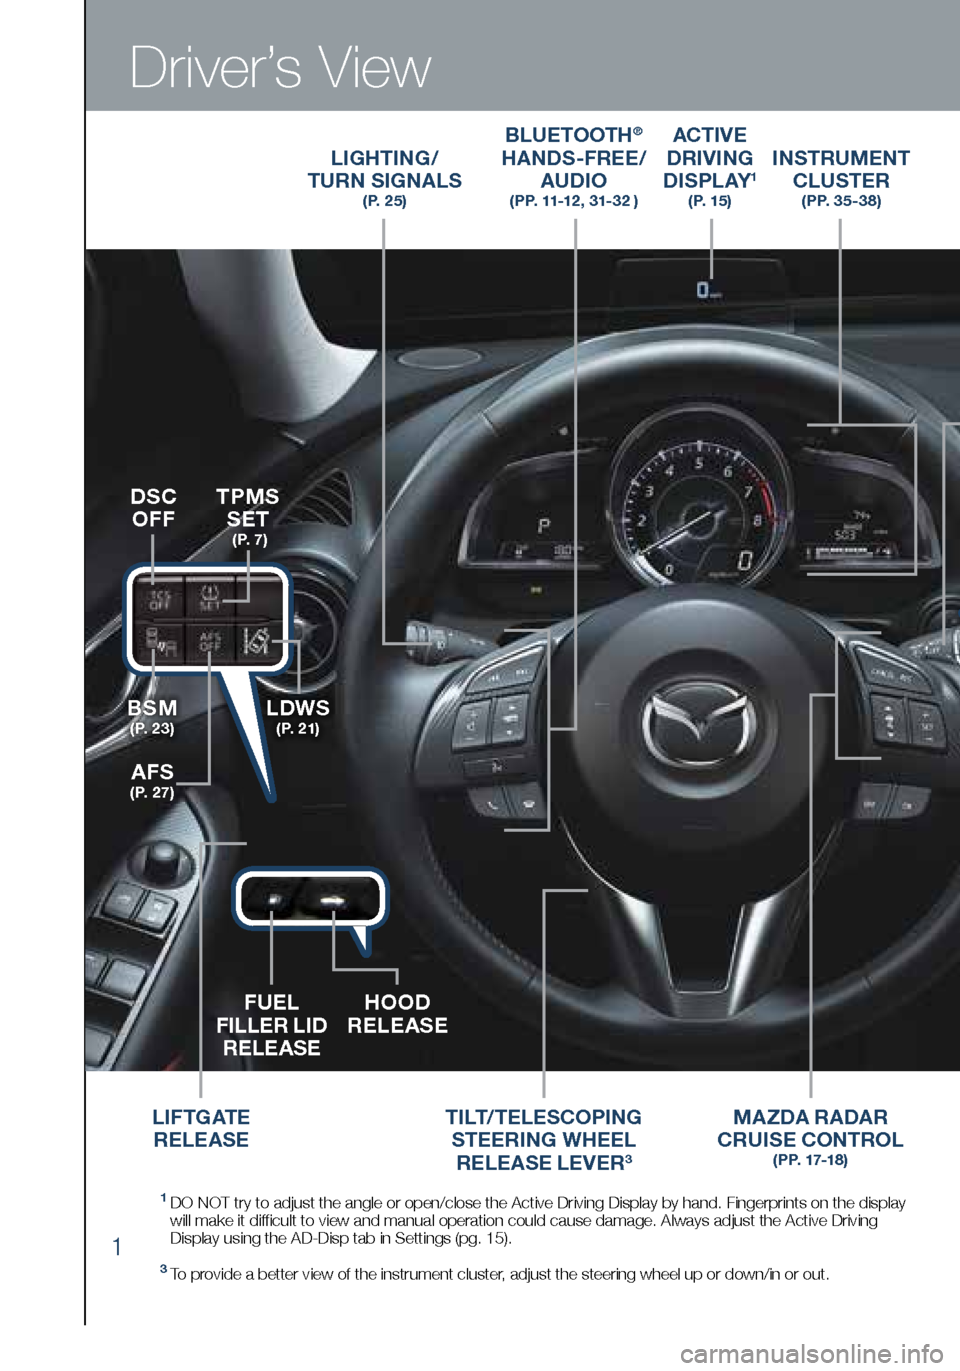 MAZDA MODEL CX-3 2016  Smart Start Guide (in English) 1
Driver’s View
LIGHTING/  
TURN SIGNALS  
( P.  2 5 )
BLUETOOTH®  
HANDS-FREE/  
AUDIO
   (PP. 11-12 , 31-32 )
ACTIVE  
DRIVING  
D I S P L AY
1   ( P.  1 5 )
TILT/TELESCOPING  
STEERING WHEEL  
R